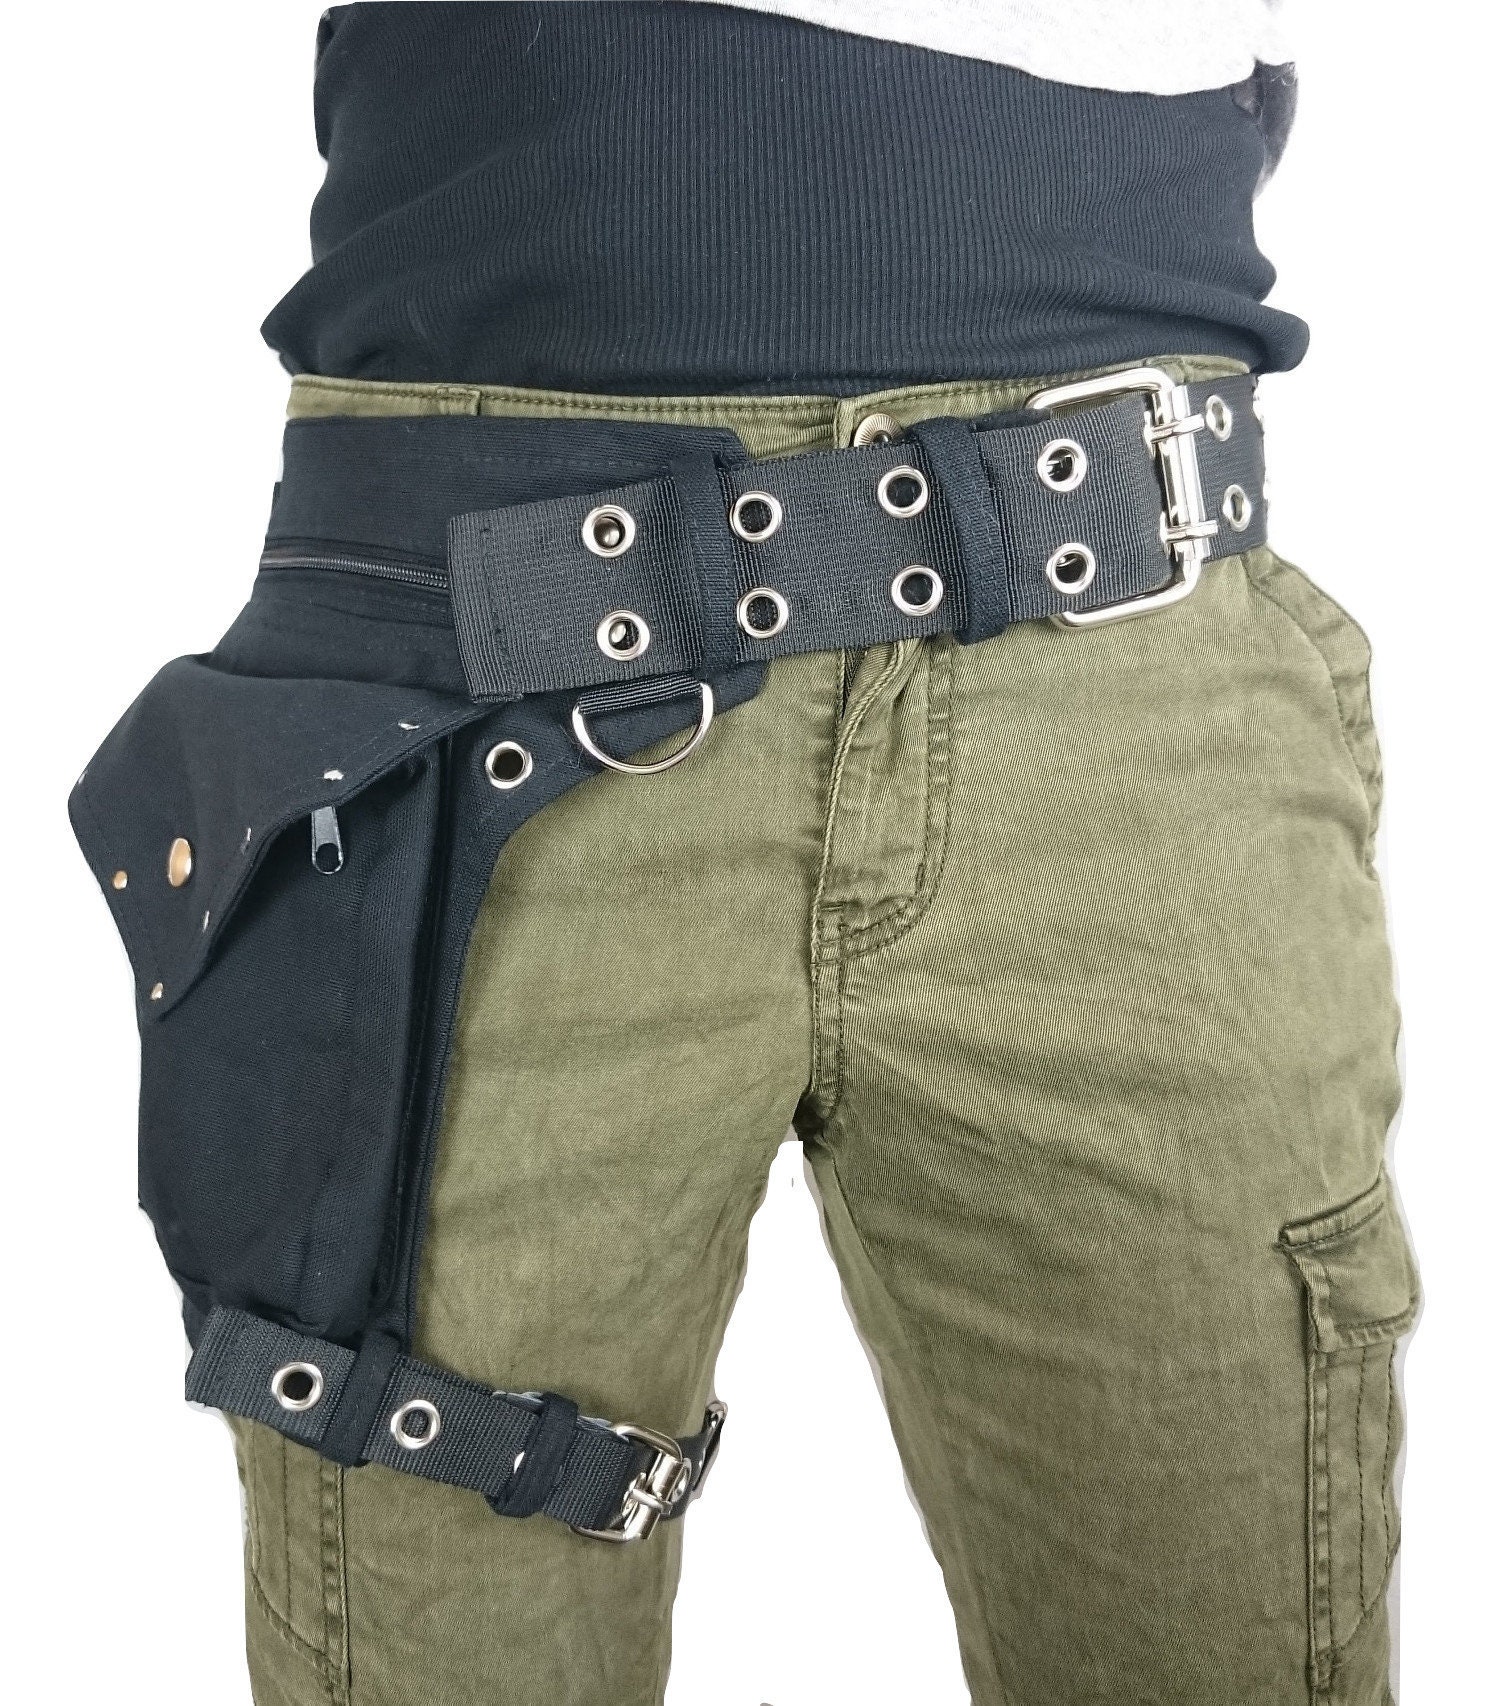 Leg Strap Utility Belt FIXED Thigh Belt for Plus Sizes Also, Made of  Organic Cotton Drop Leg Pouch, Holster Bags, Hip Bag Burning Man -   Canada